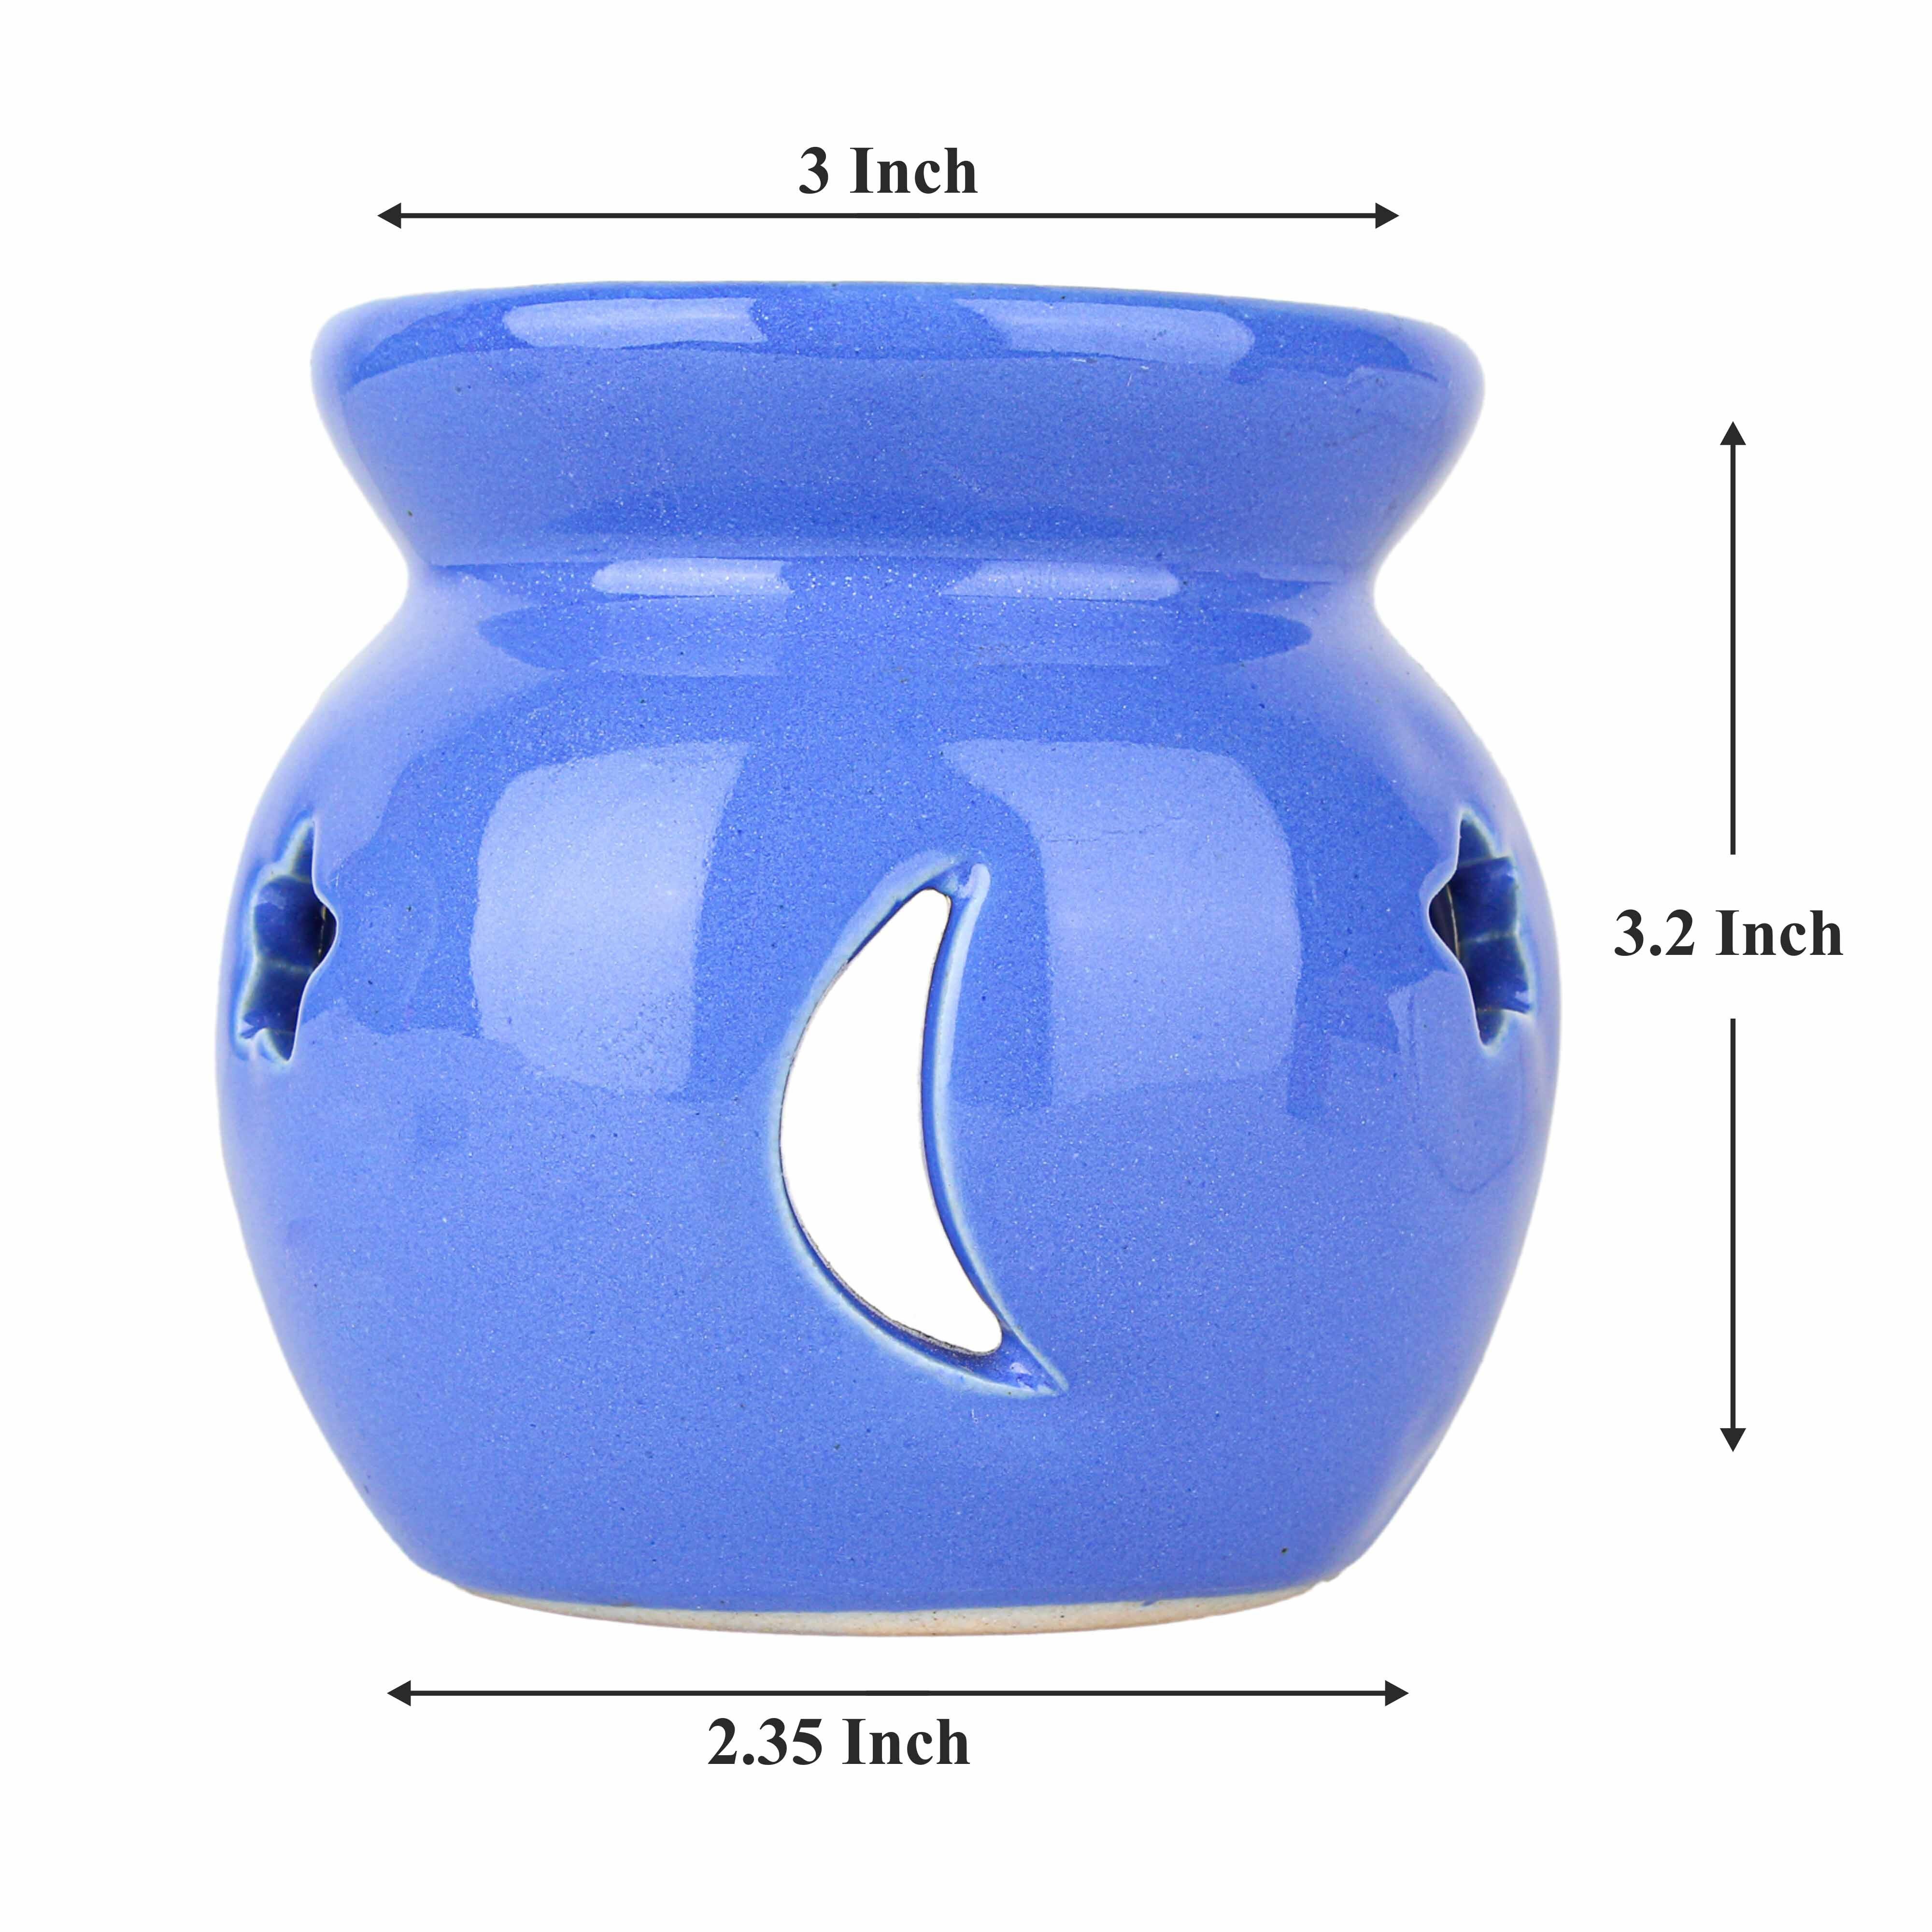 Asian Aura Ceramic Aromatic Oil Diffuser with 2 oil bottles AA-CB-0041BLUE